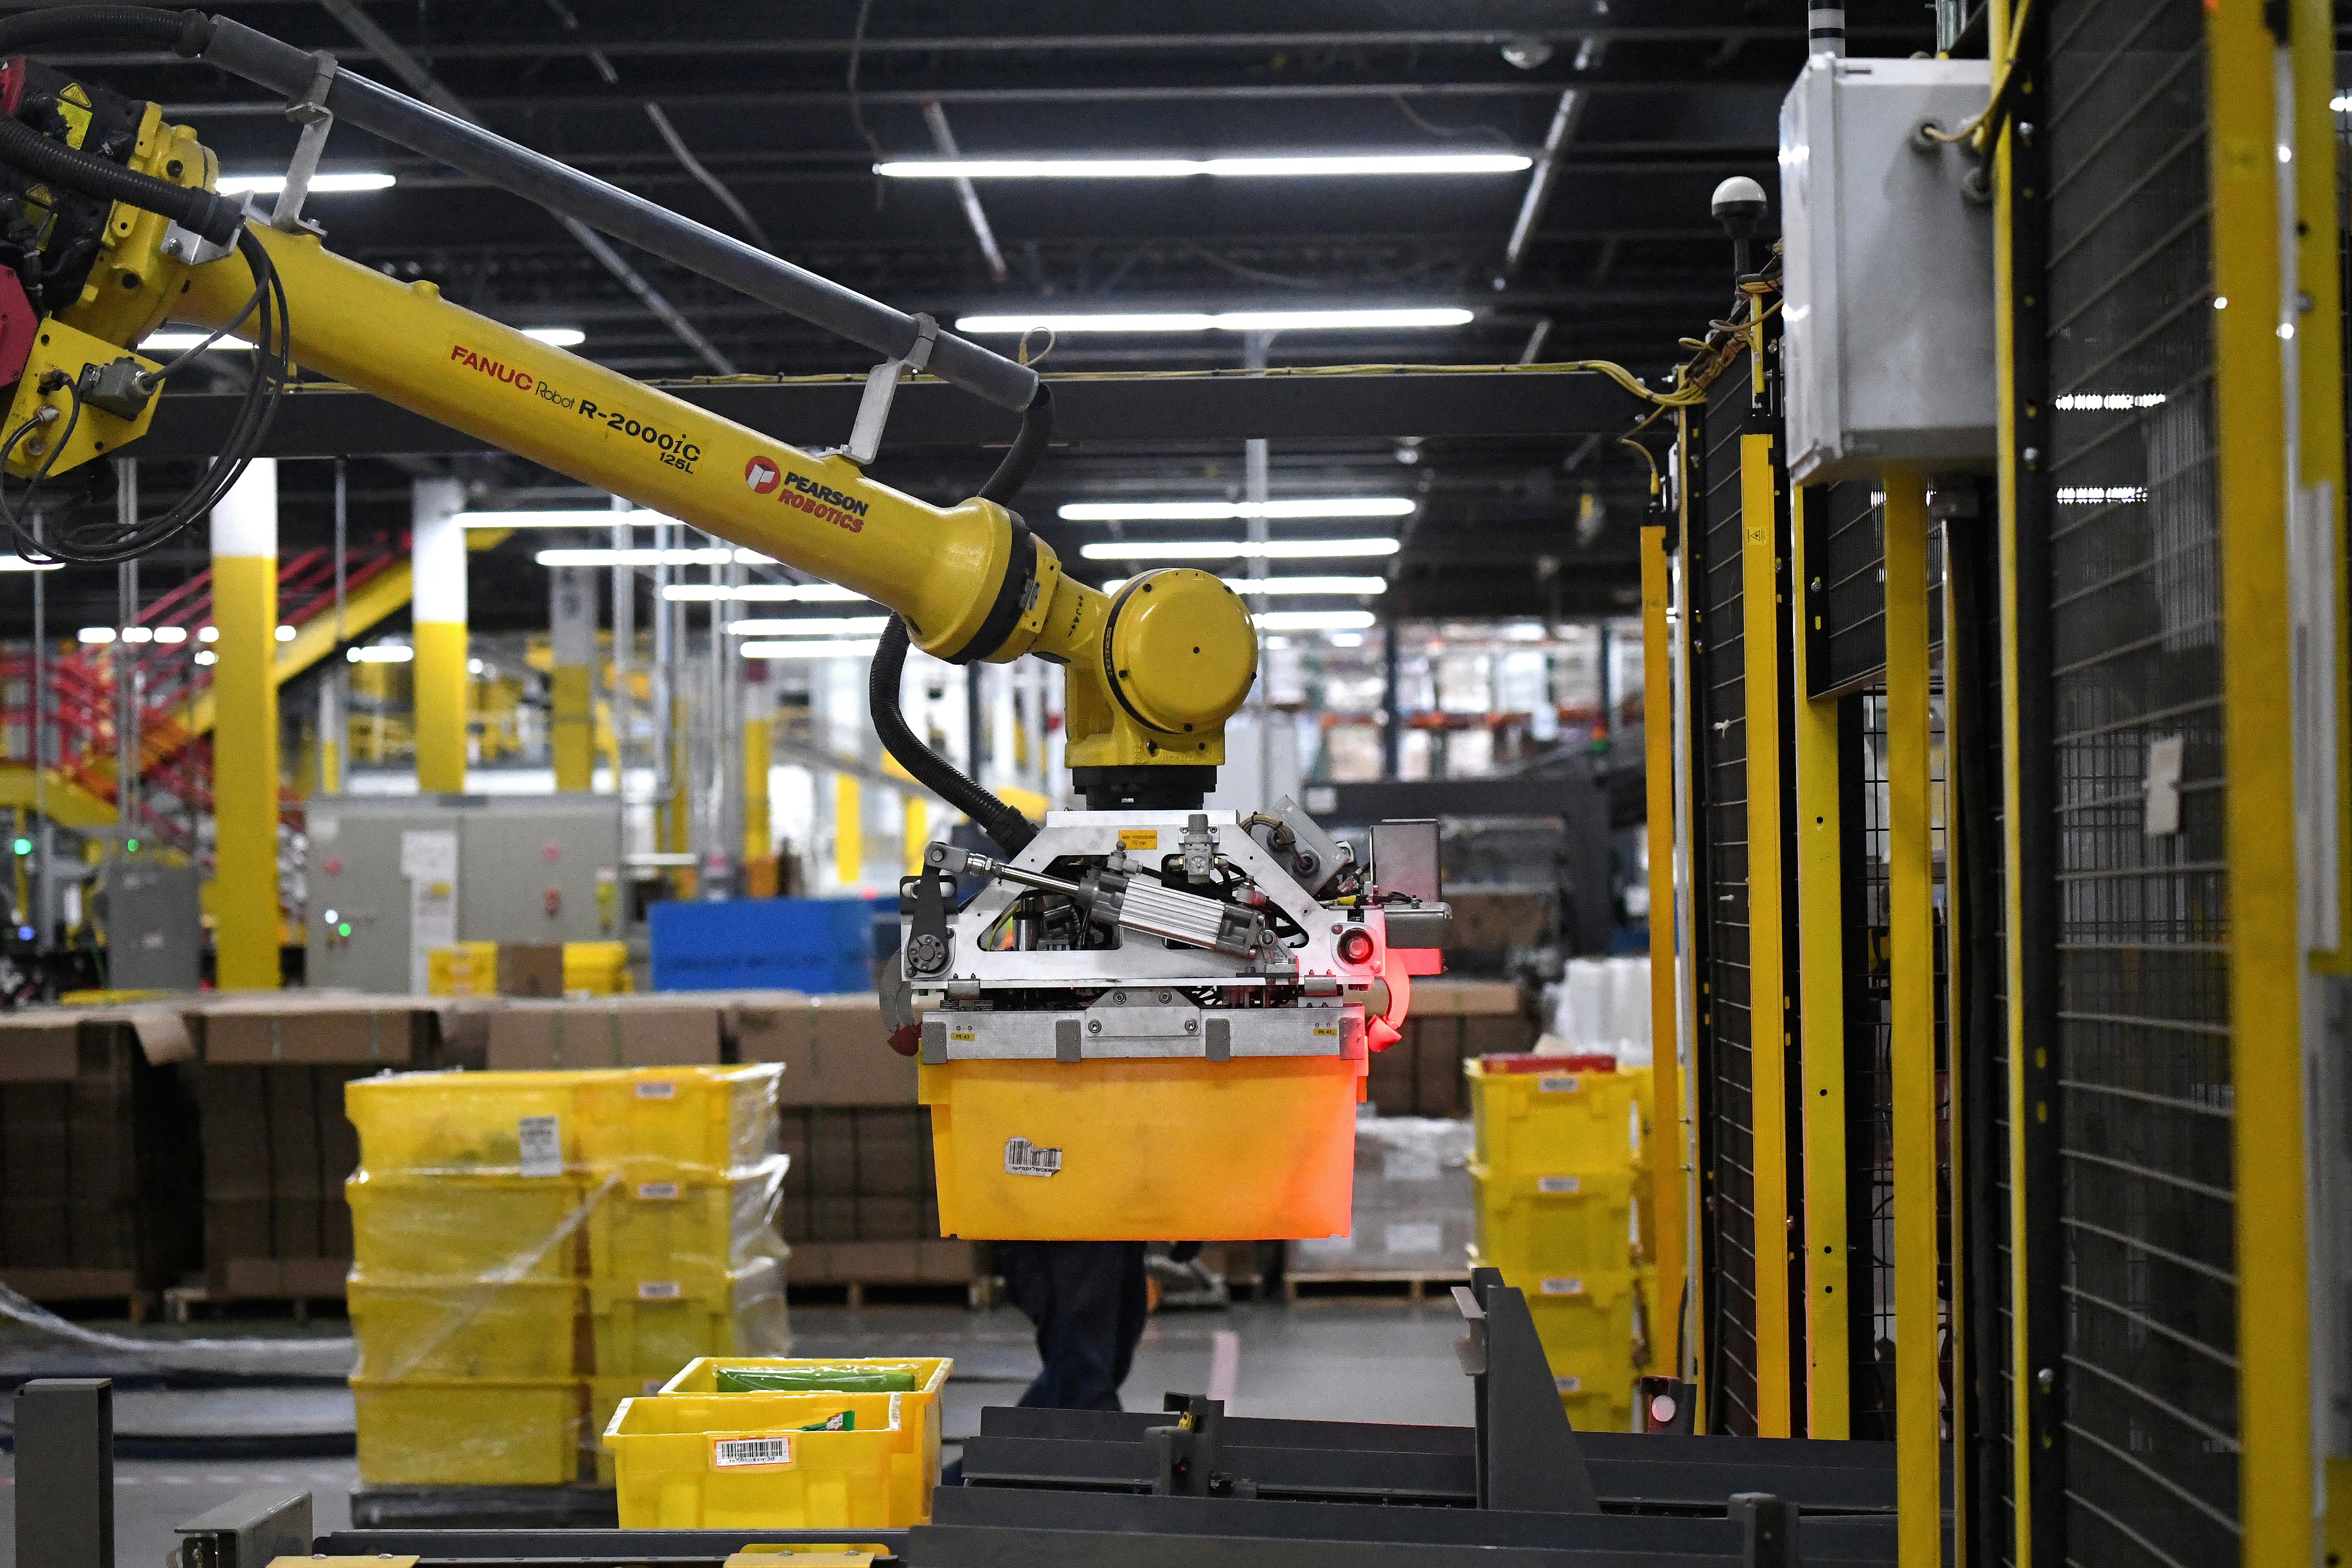 Six-axis robot arm picks up sorting containers at the Amazon fulfillment center in Baltimore